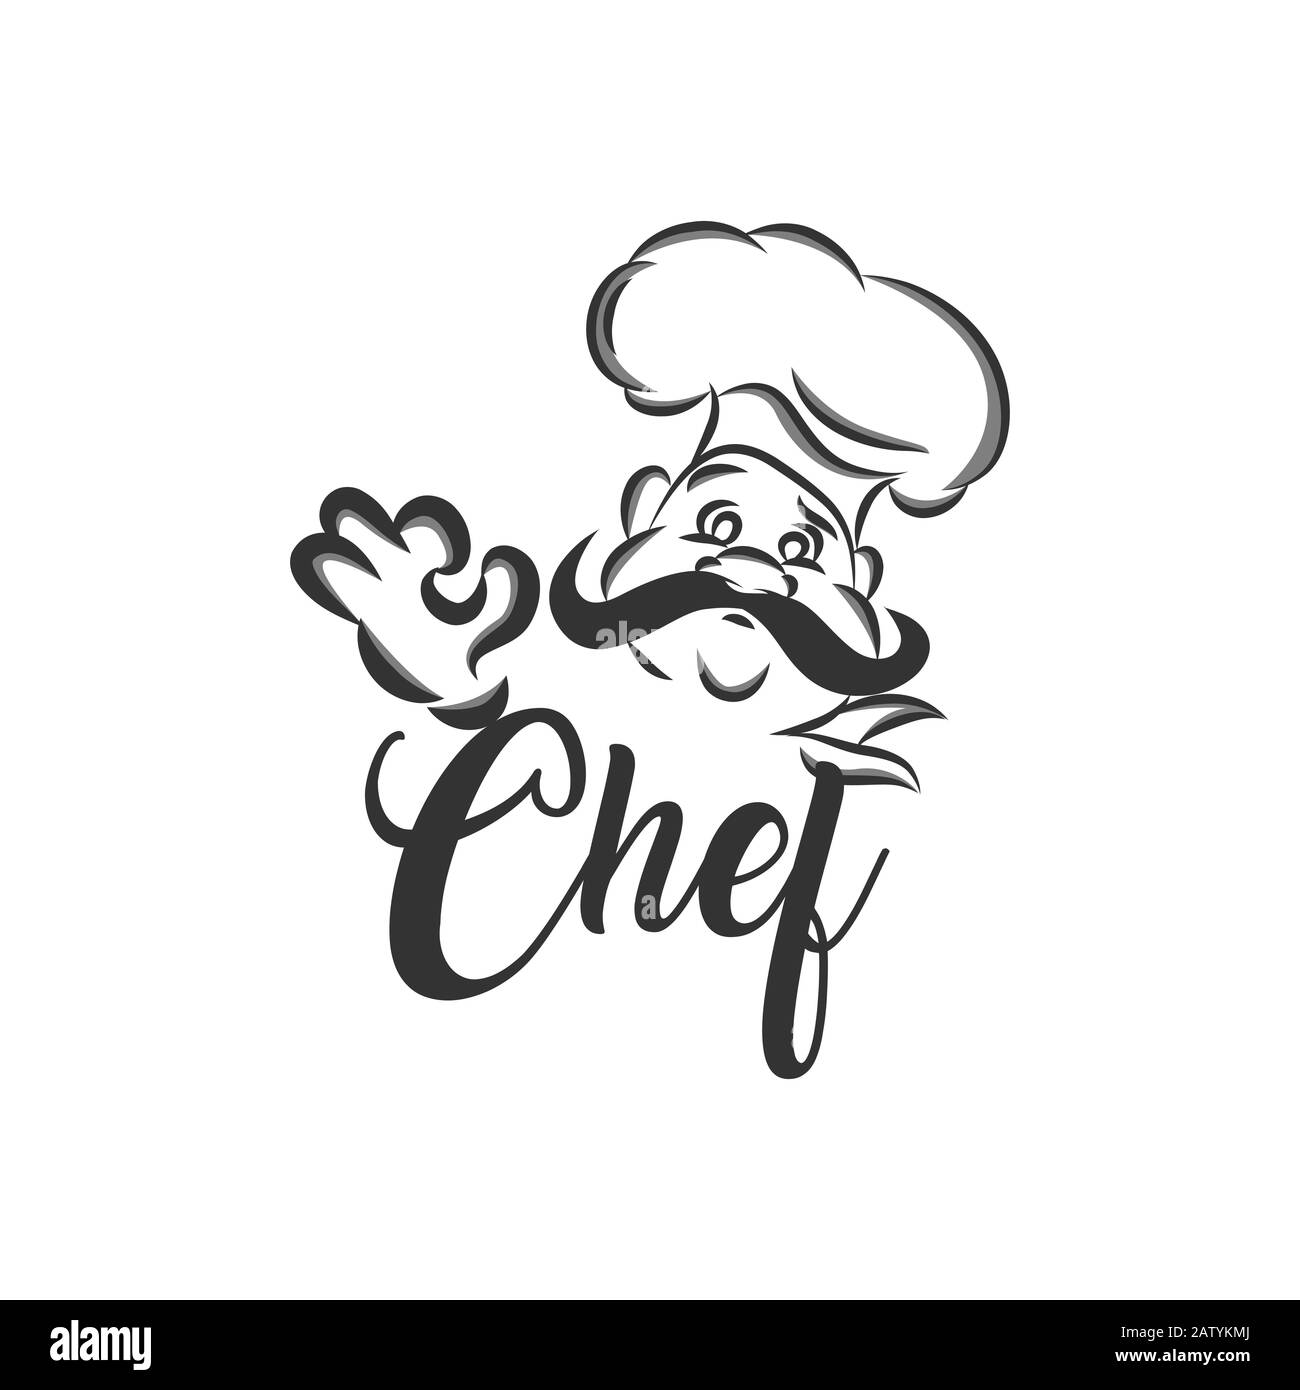 Chef logo. Lettering Hand lettering with a cap chef. Symbol icon logo ...